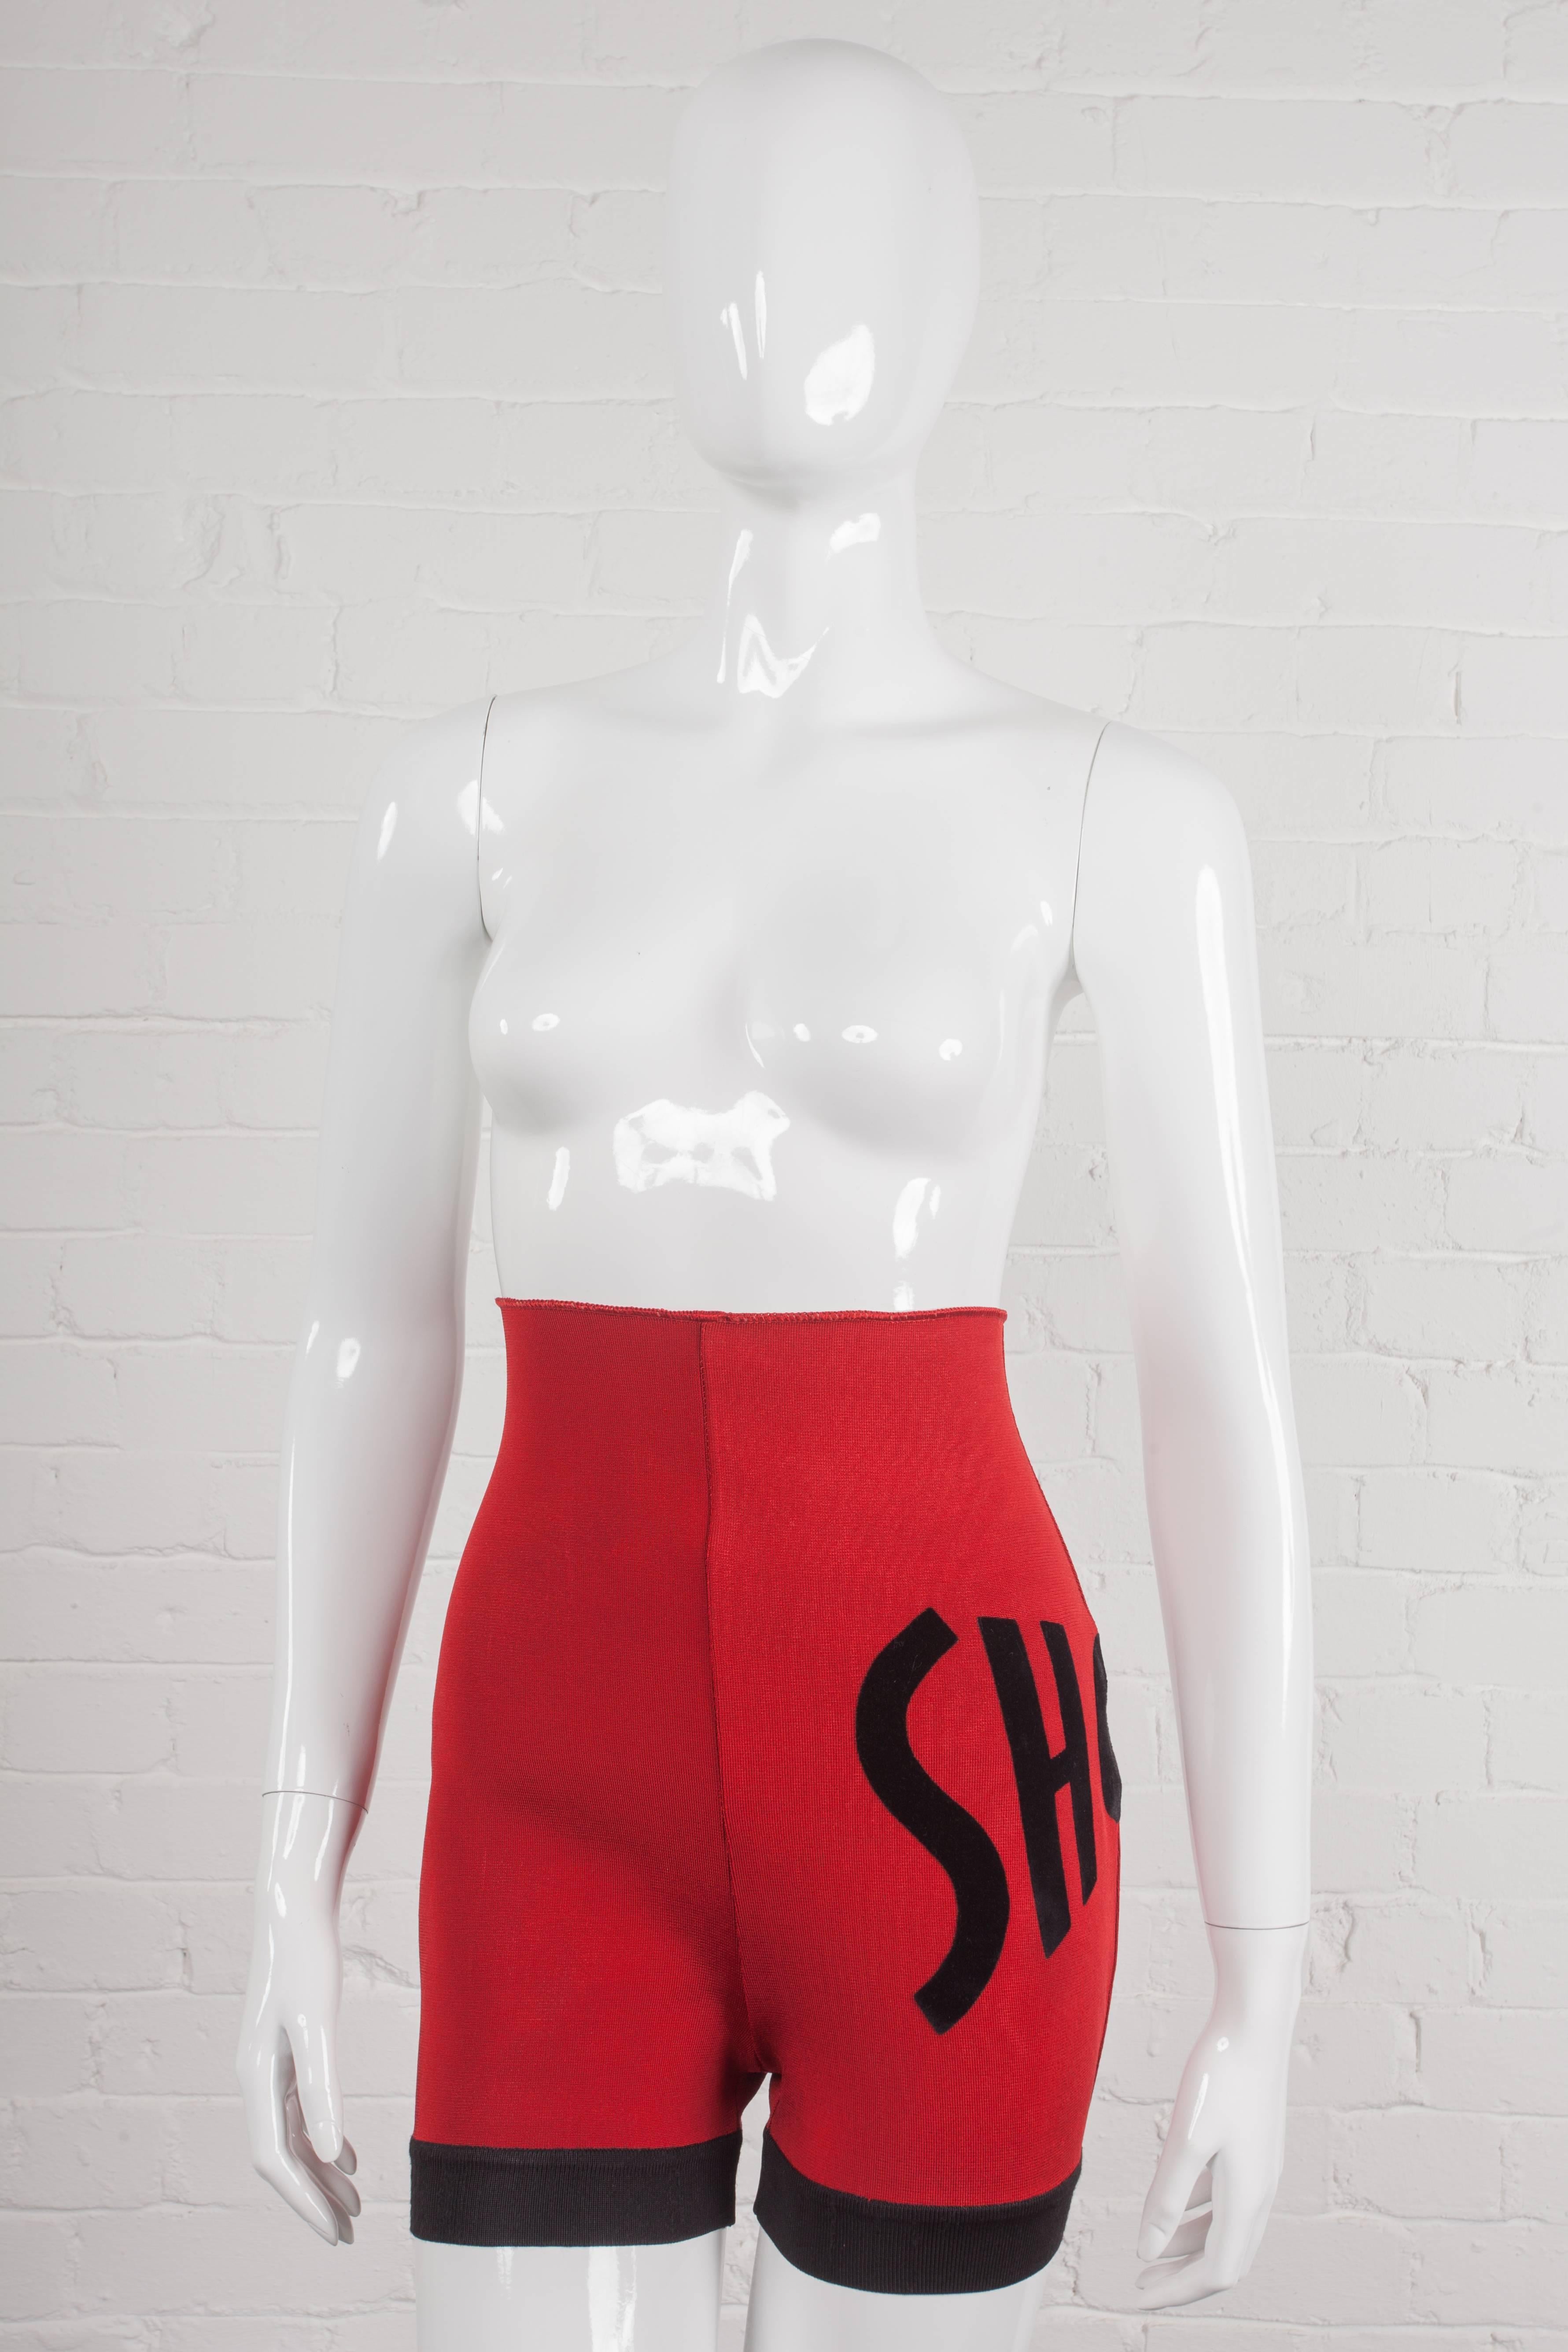 Fitted stretch shorts in red with a black trim, waistband-free high-waist from the Jean-Paul Gaultier Spring/Summer 1990 “Rap’Prayers” Collection. Featuring the word ‘short’ in capital letters as a velvet motif and with a cut out hole in the ‘o’